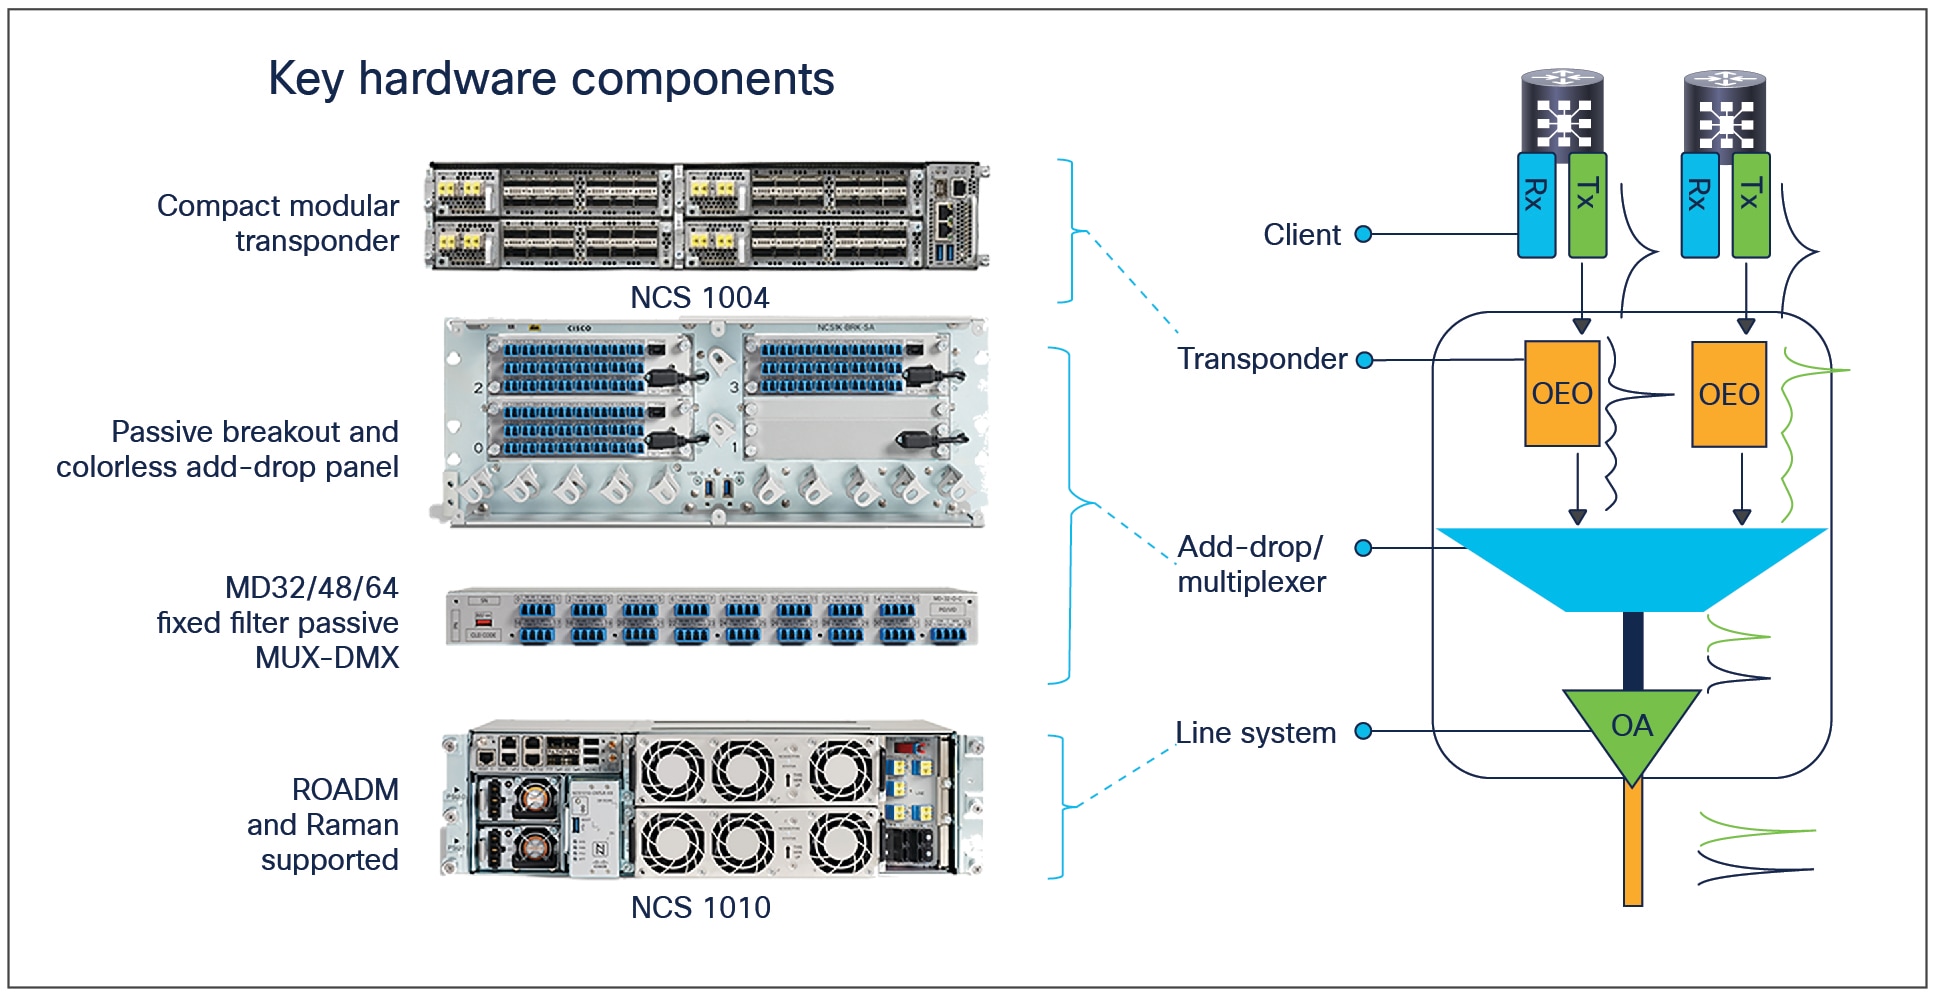 NCS 1010 solution components